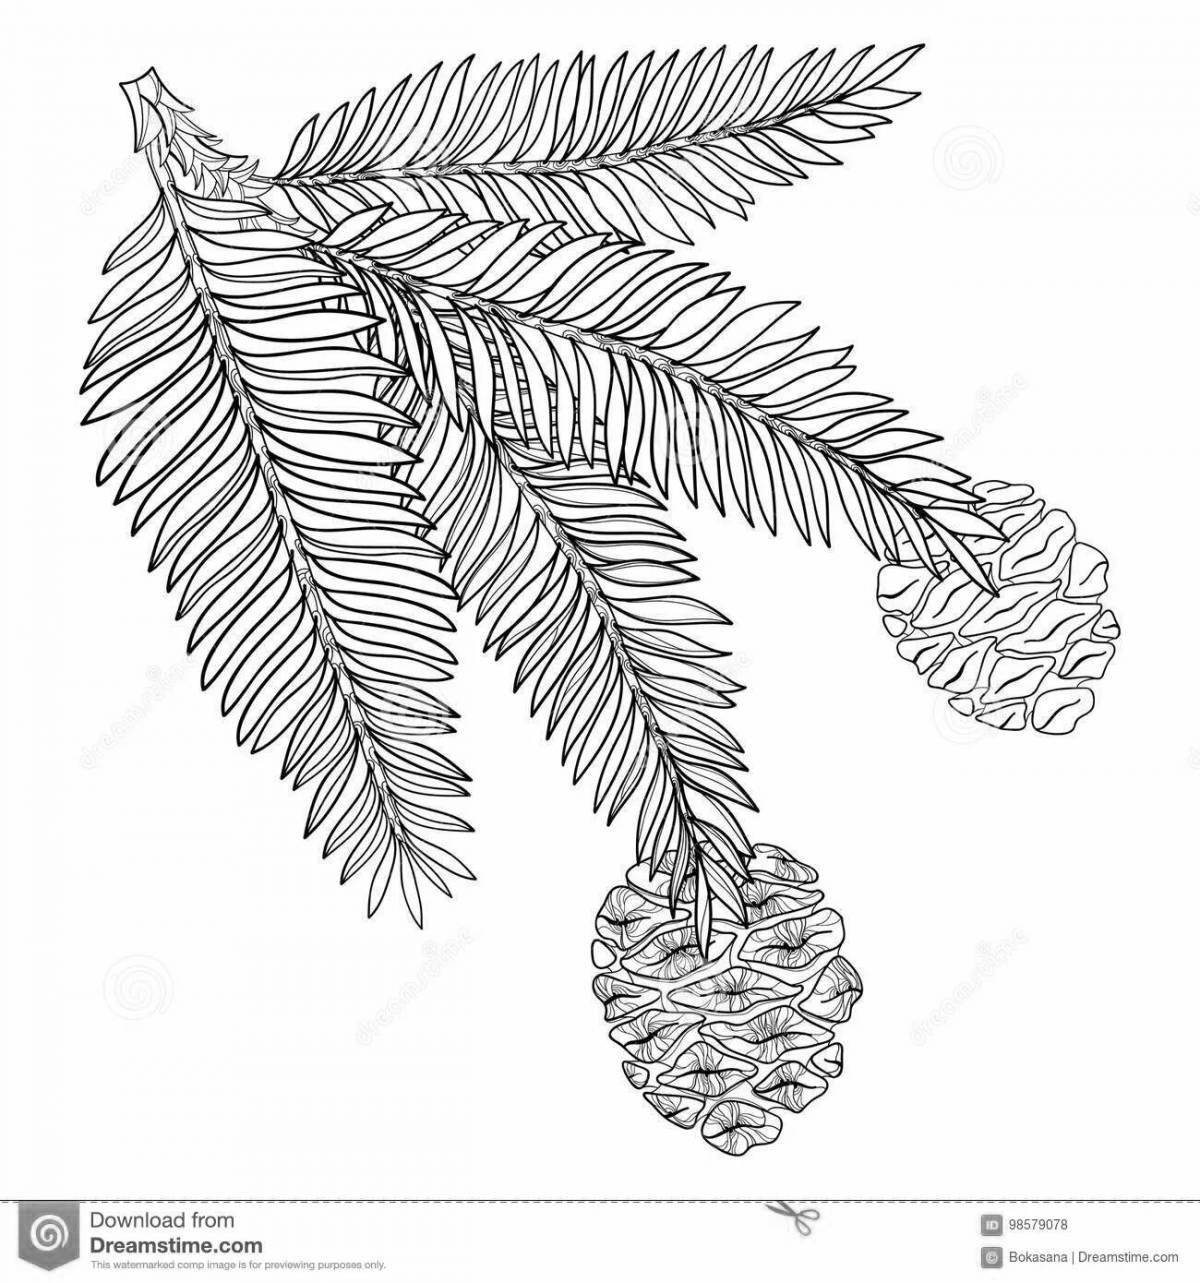 Coloring book gorgeous spruce branch for kids